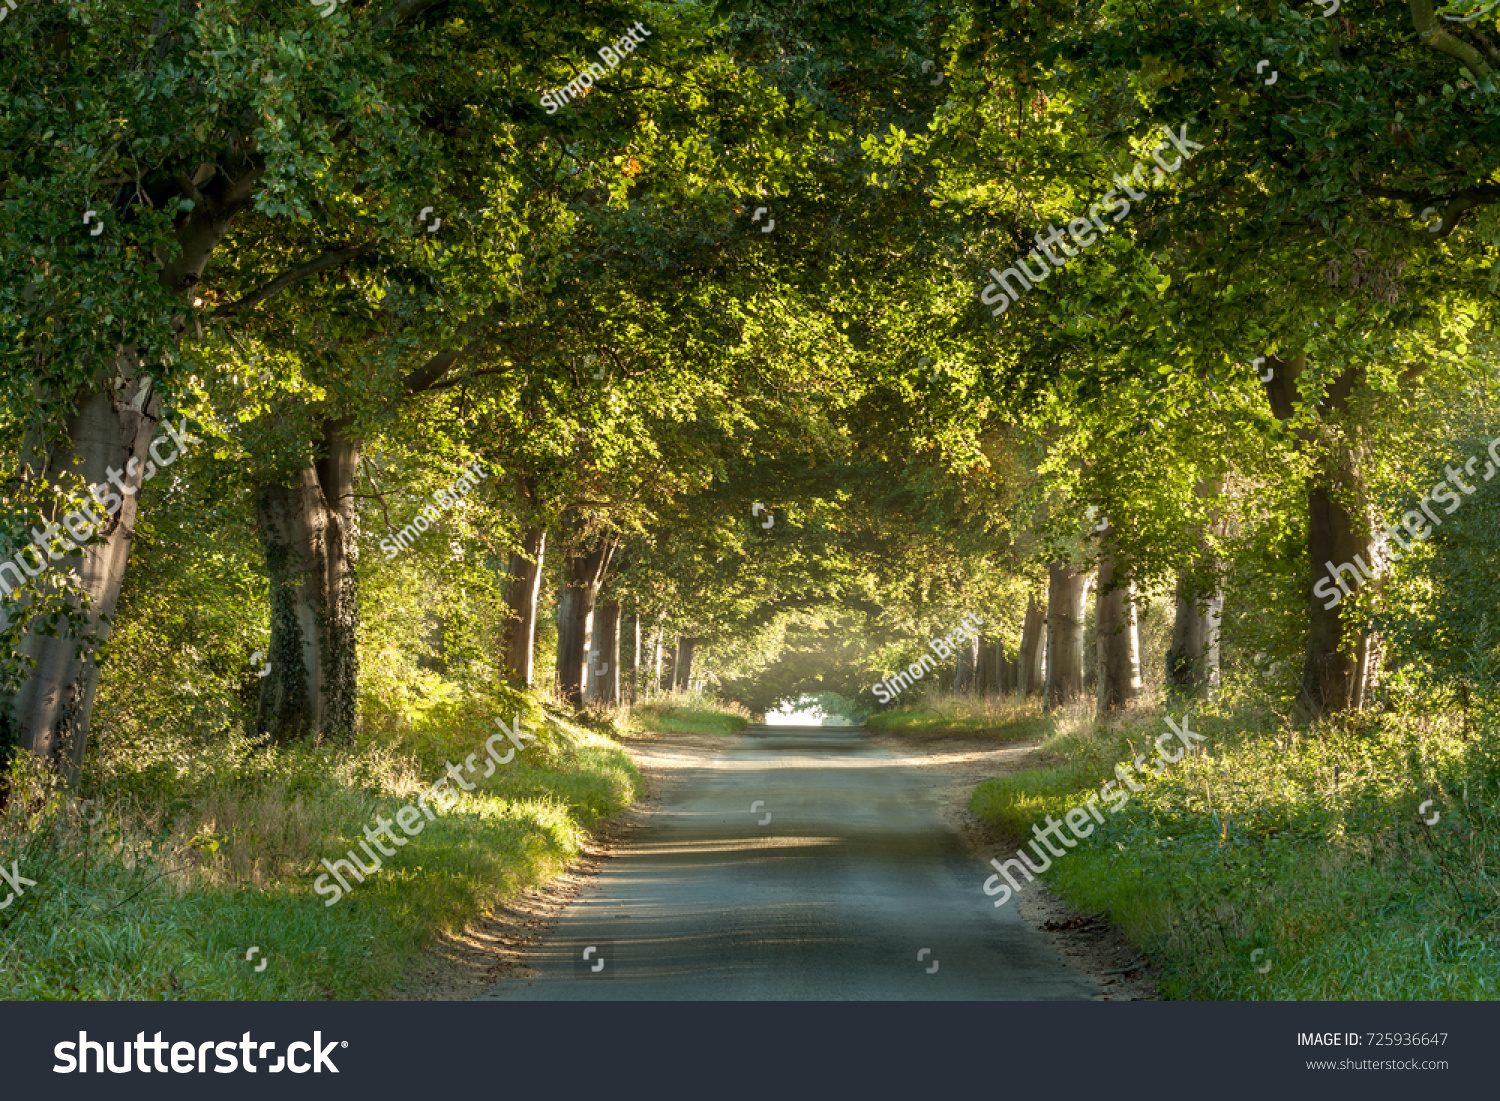 Tree arches across a rural country lane showing nature and roads living in harmony. Sunrise light glowing under the canopy and branches. Tree trucks reflecting the warmth of the morning sun.  #725936647